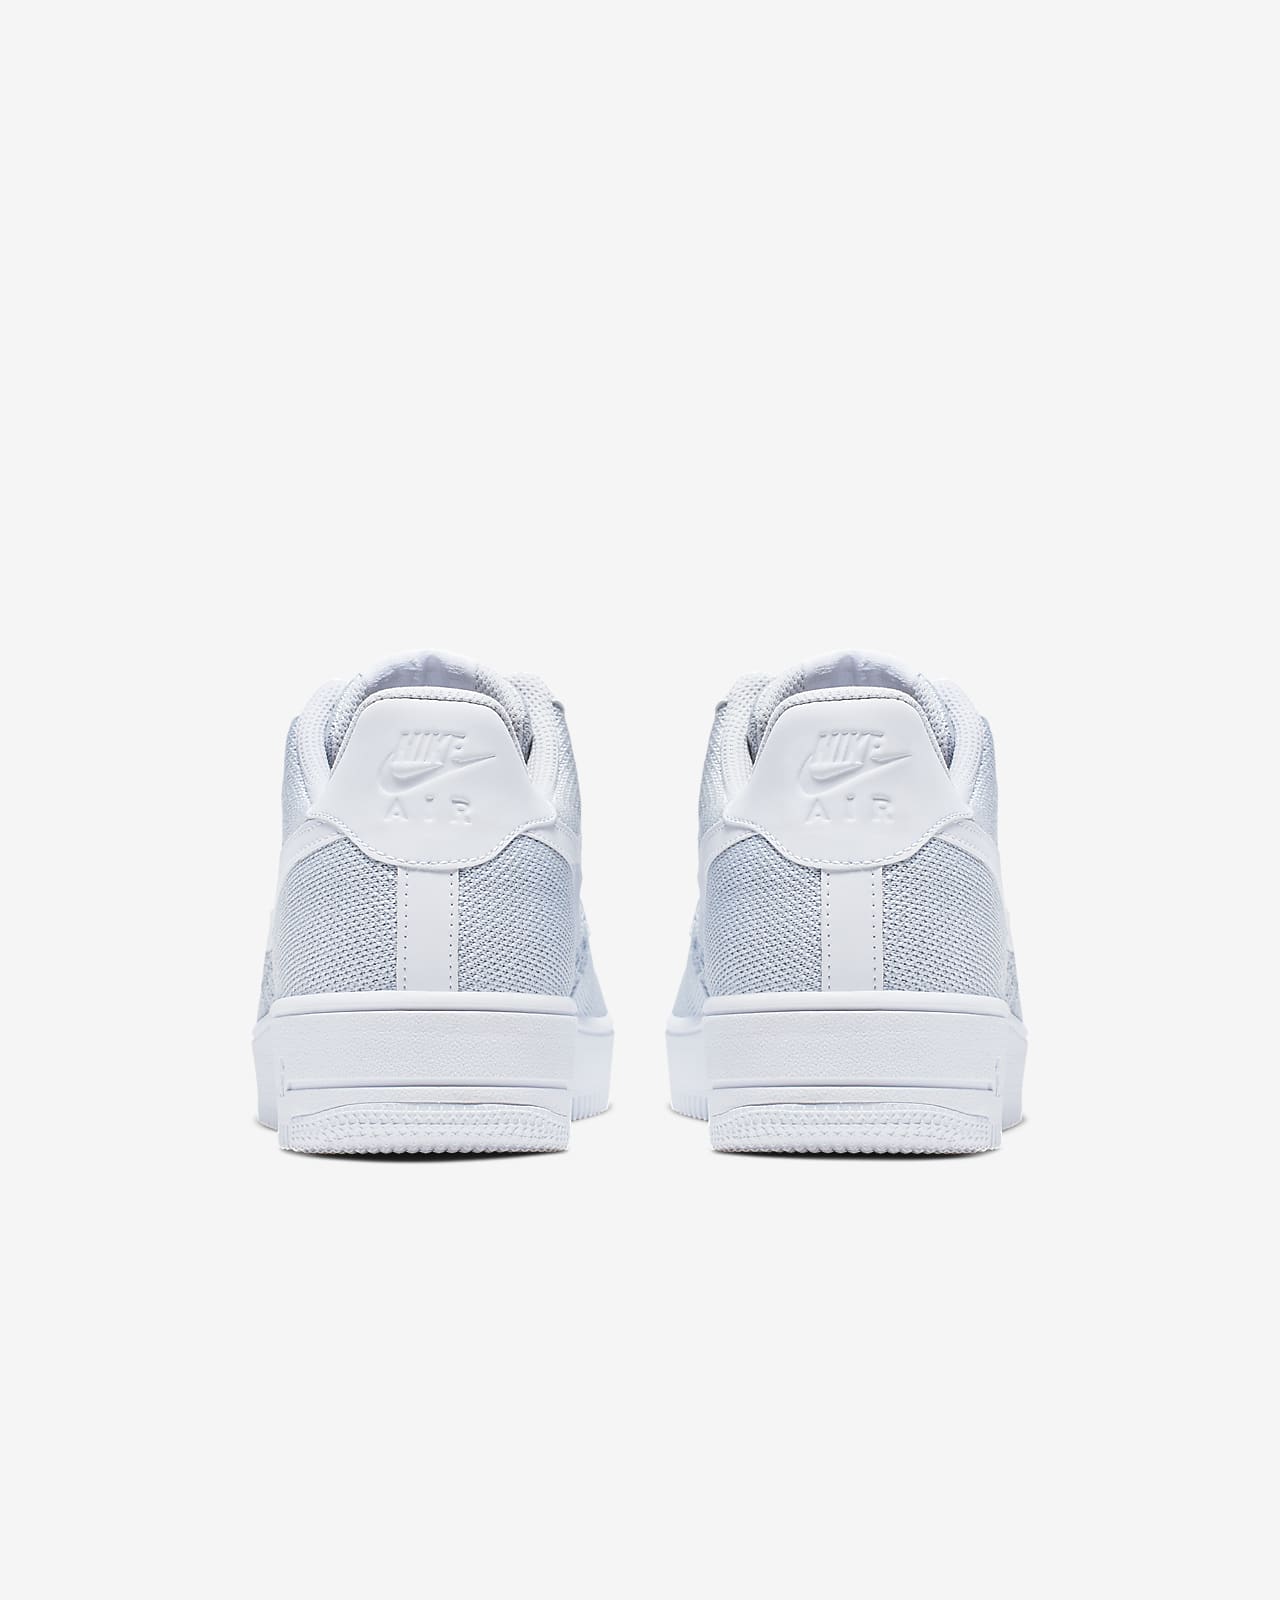 nike air force 1 flyknit 2.0 sizing